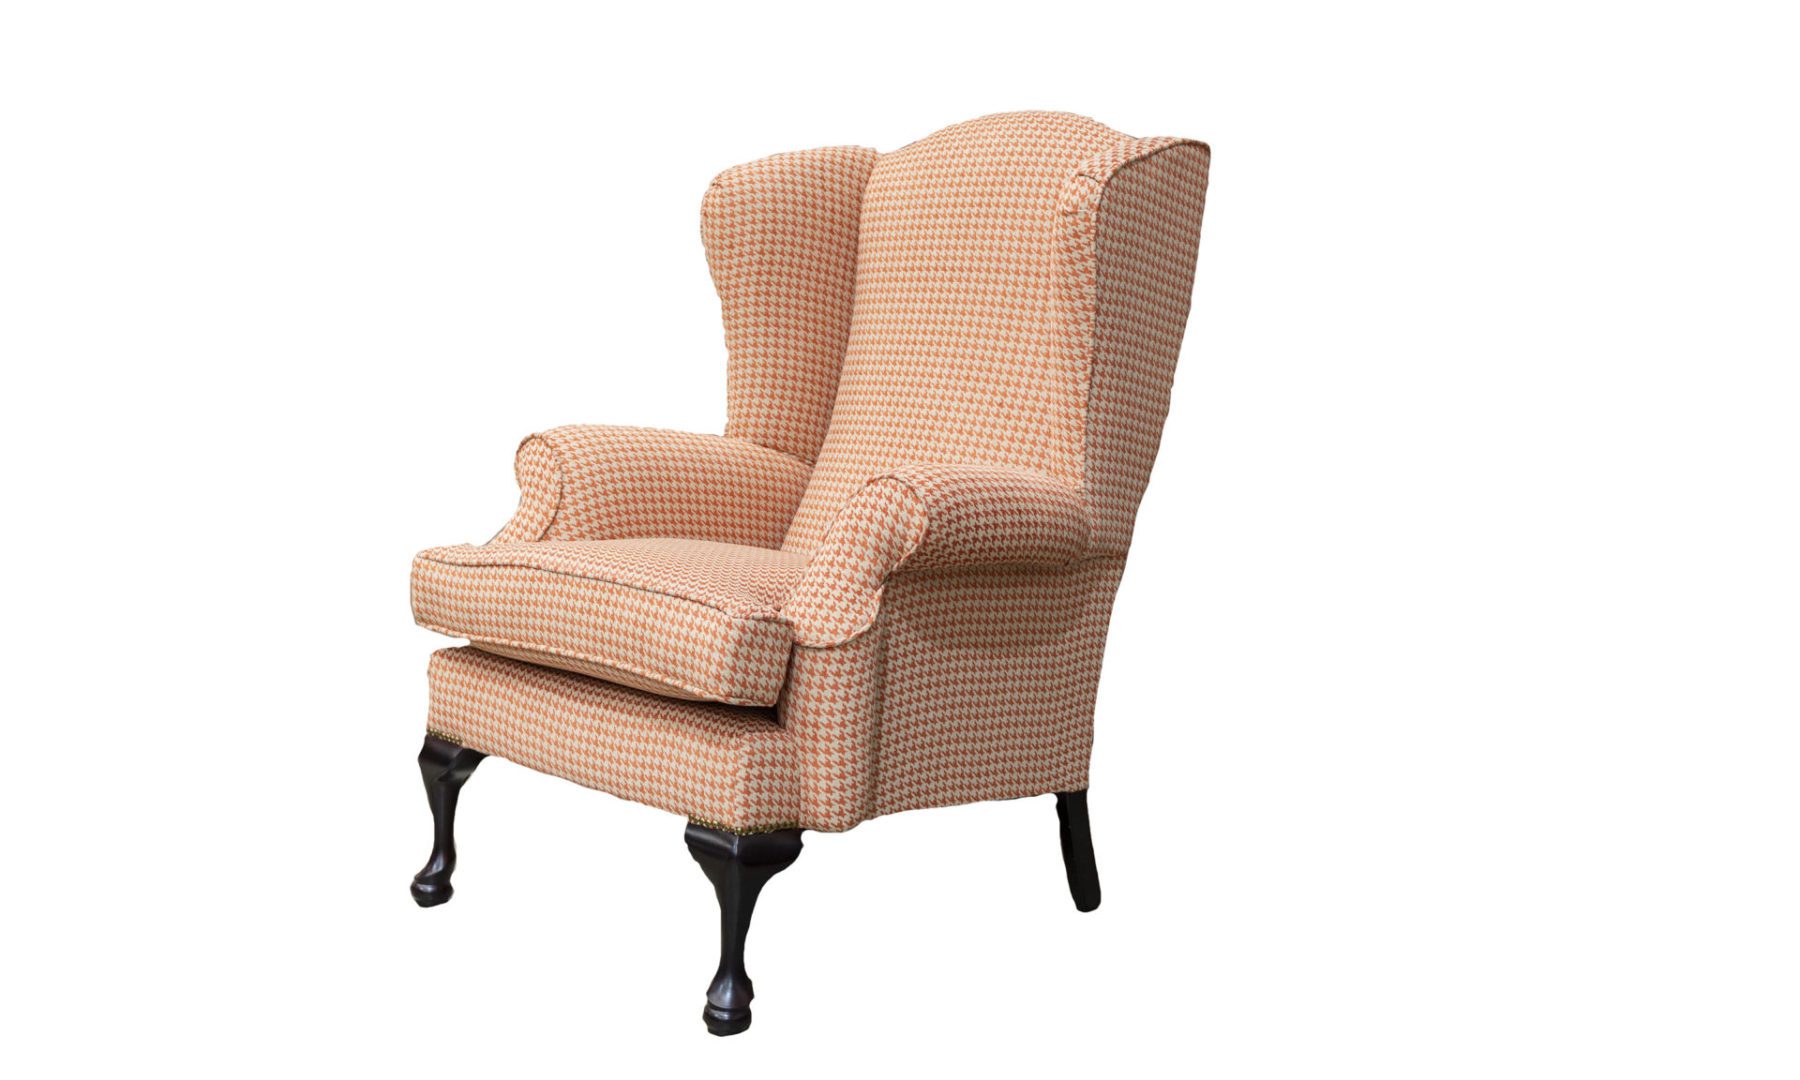 Queen Anne Chair in Poppy Orange, Silver Collection Fabric